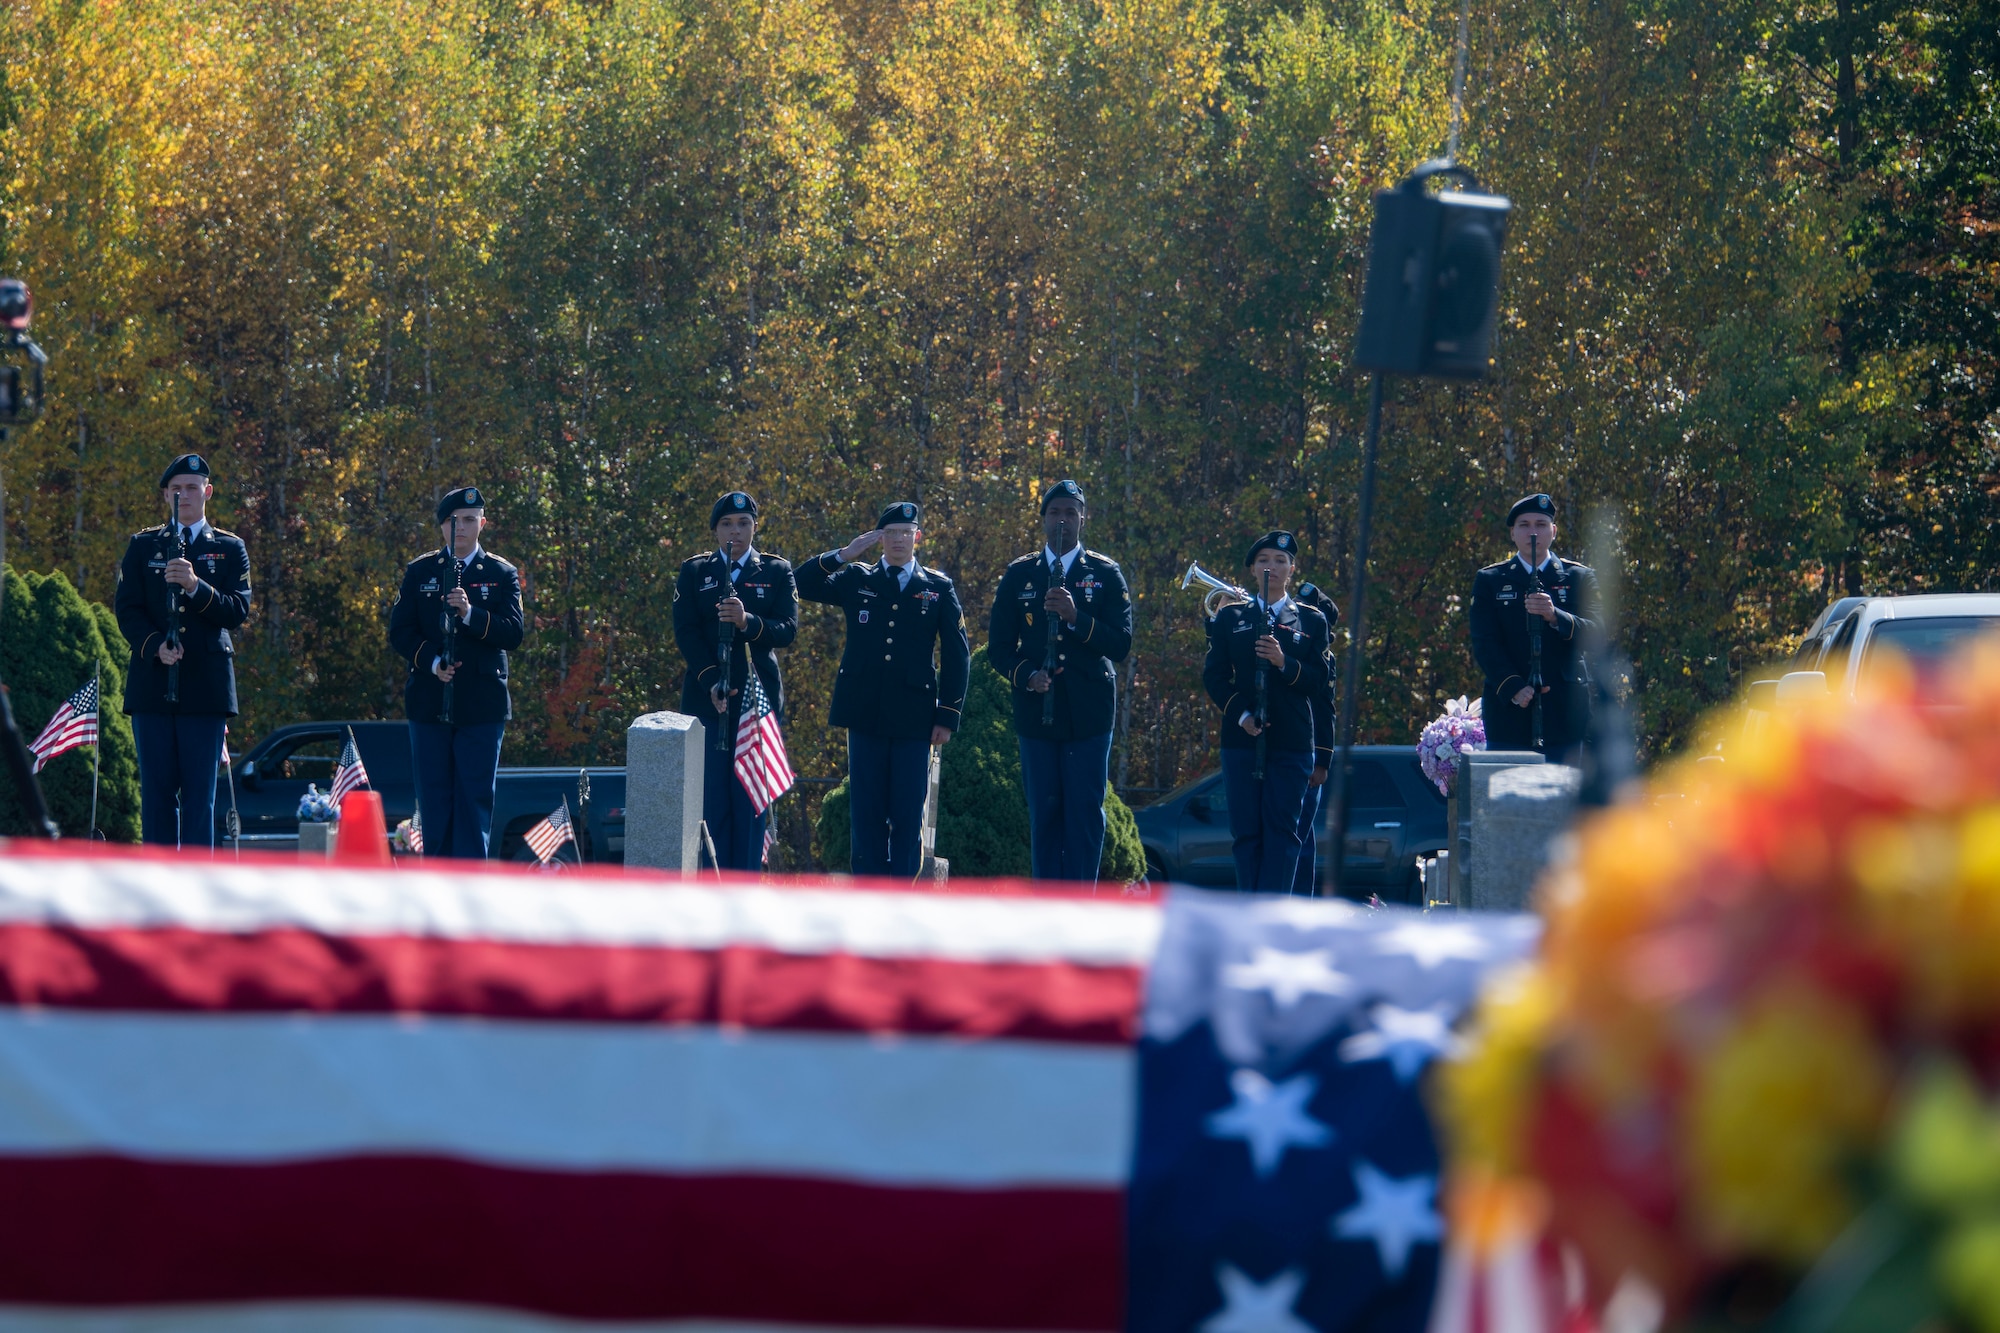 Members of the U.S. Army Honor Guard team from Fort Drum, New York, perform “Taps” for the funeral of U.S. Army Air Forces 2nd Lt. Ernest Vienneau, former 97th Bombardment Group pilot, at Millinocket, Maine, Oct. 9, 2021. Taps is a bugle melody played at military funerals and memorials as well as a lights-out signal to service members at night, which dates back to the American Civil War. (U.S. Air Force photo by Staff Sgt. Cody Dowell)